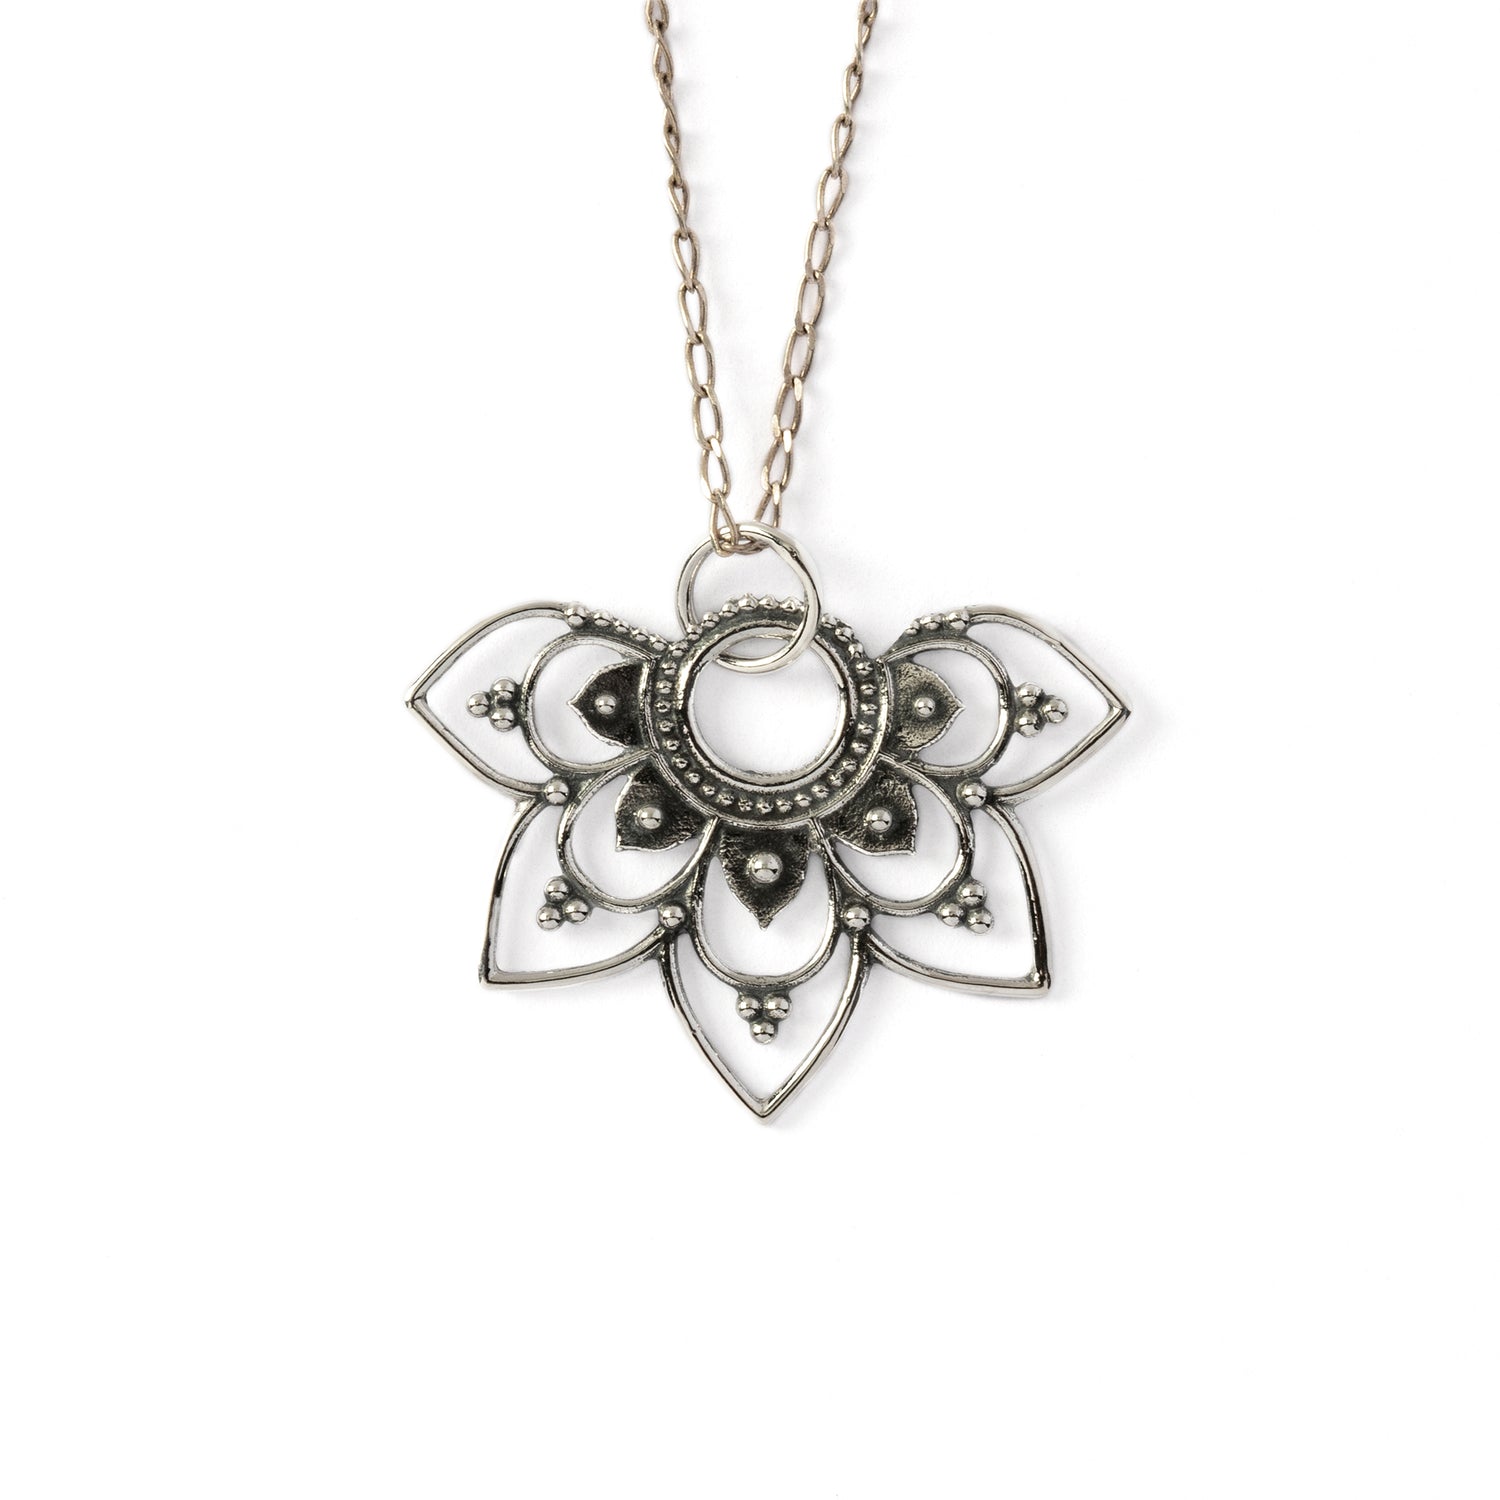 Vinyasa flower silver necklace frontal view